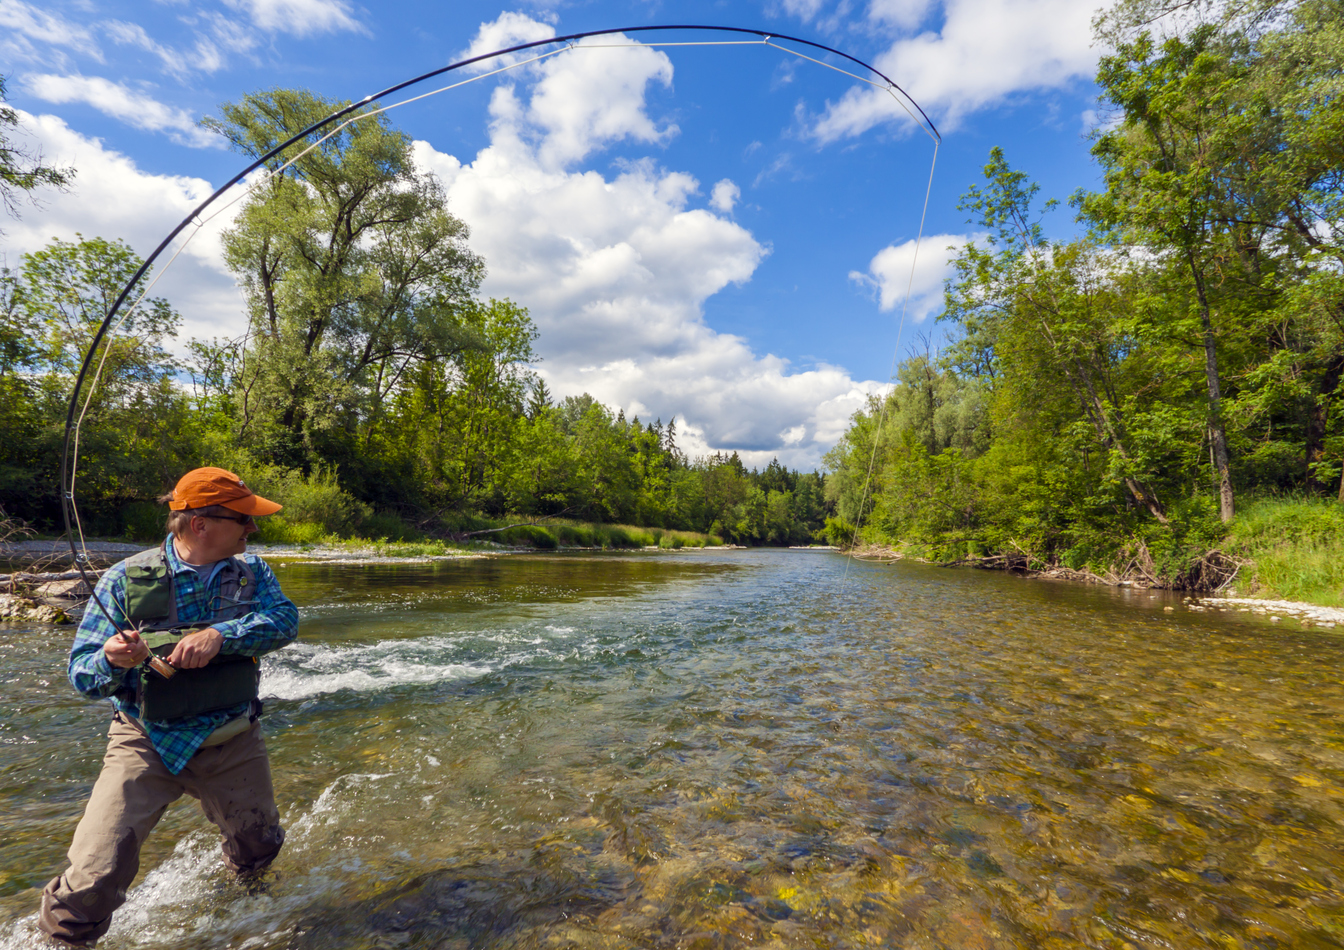 A fisherman is fly fishing in a beautiful river and his fishing rod is bent.